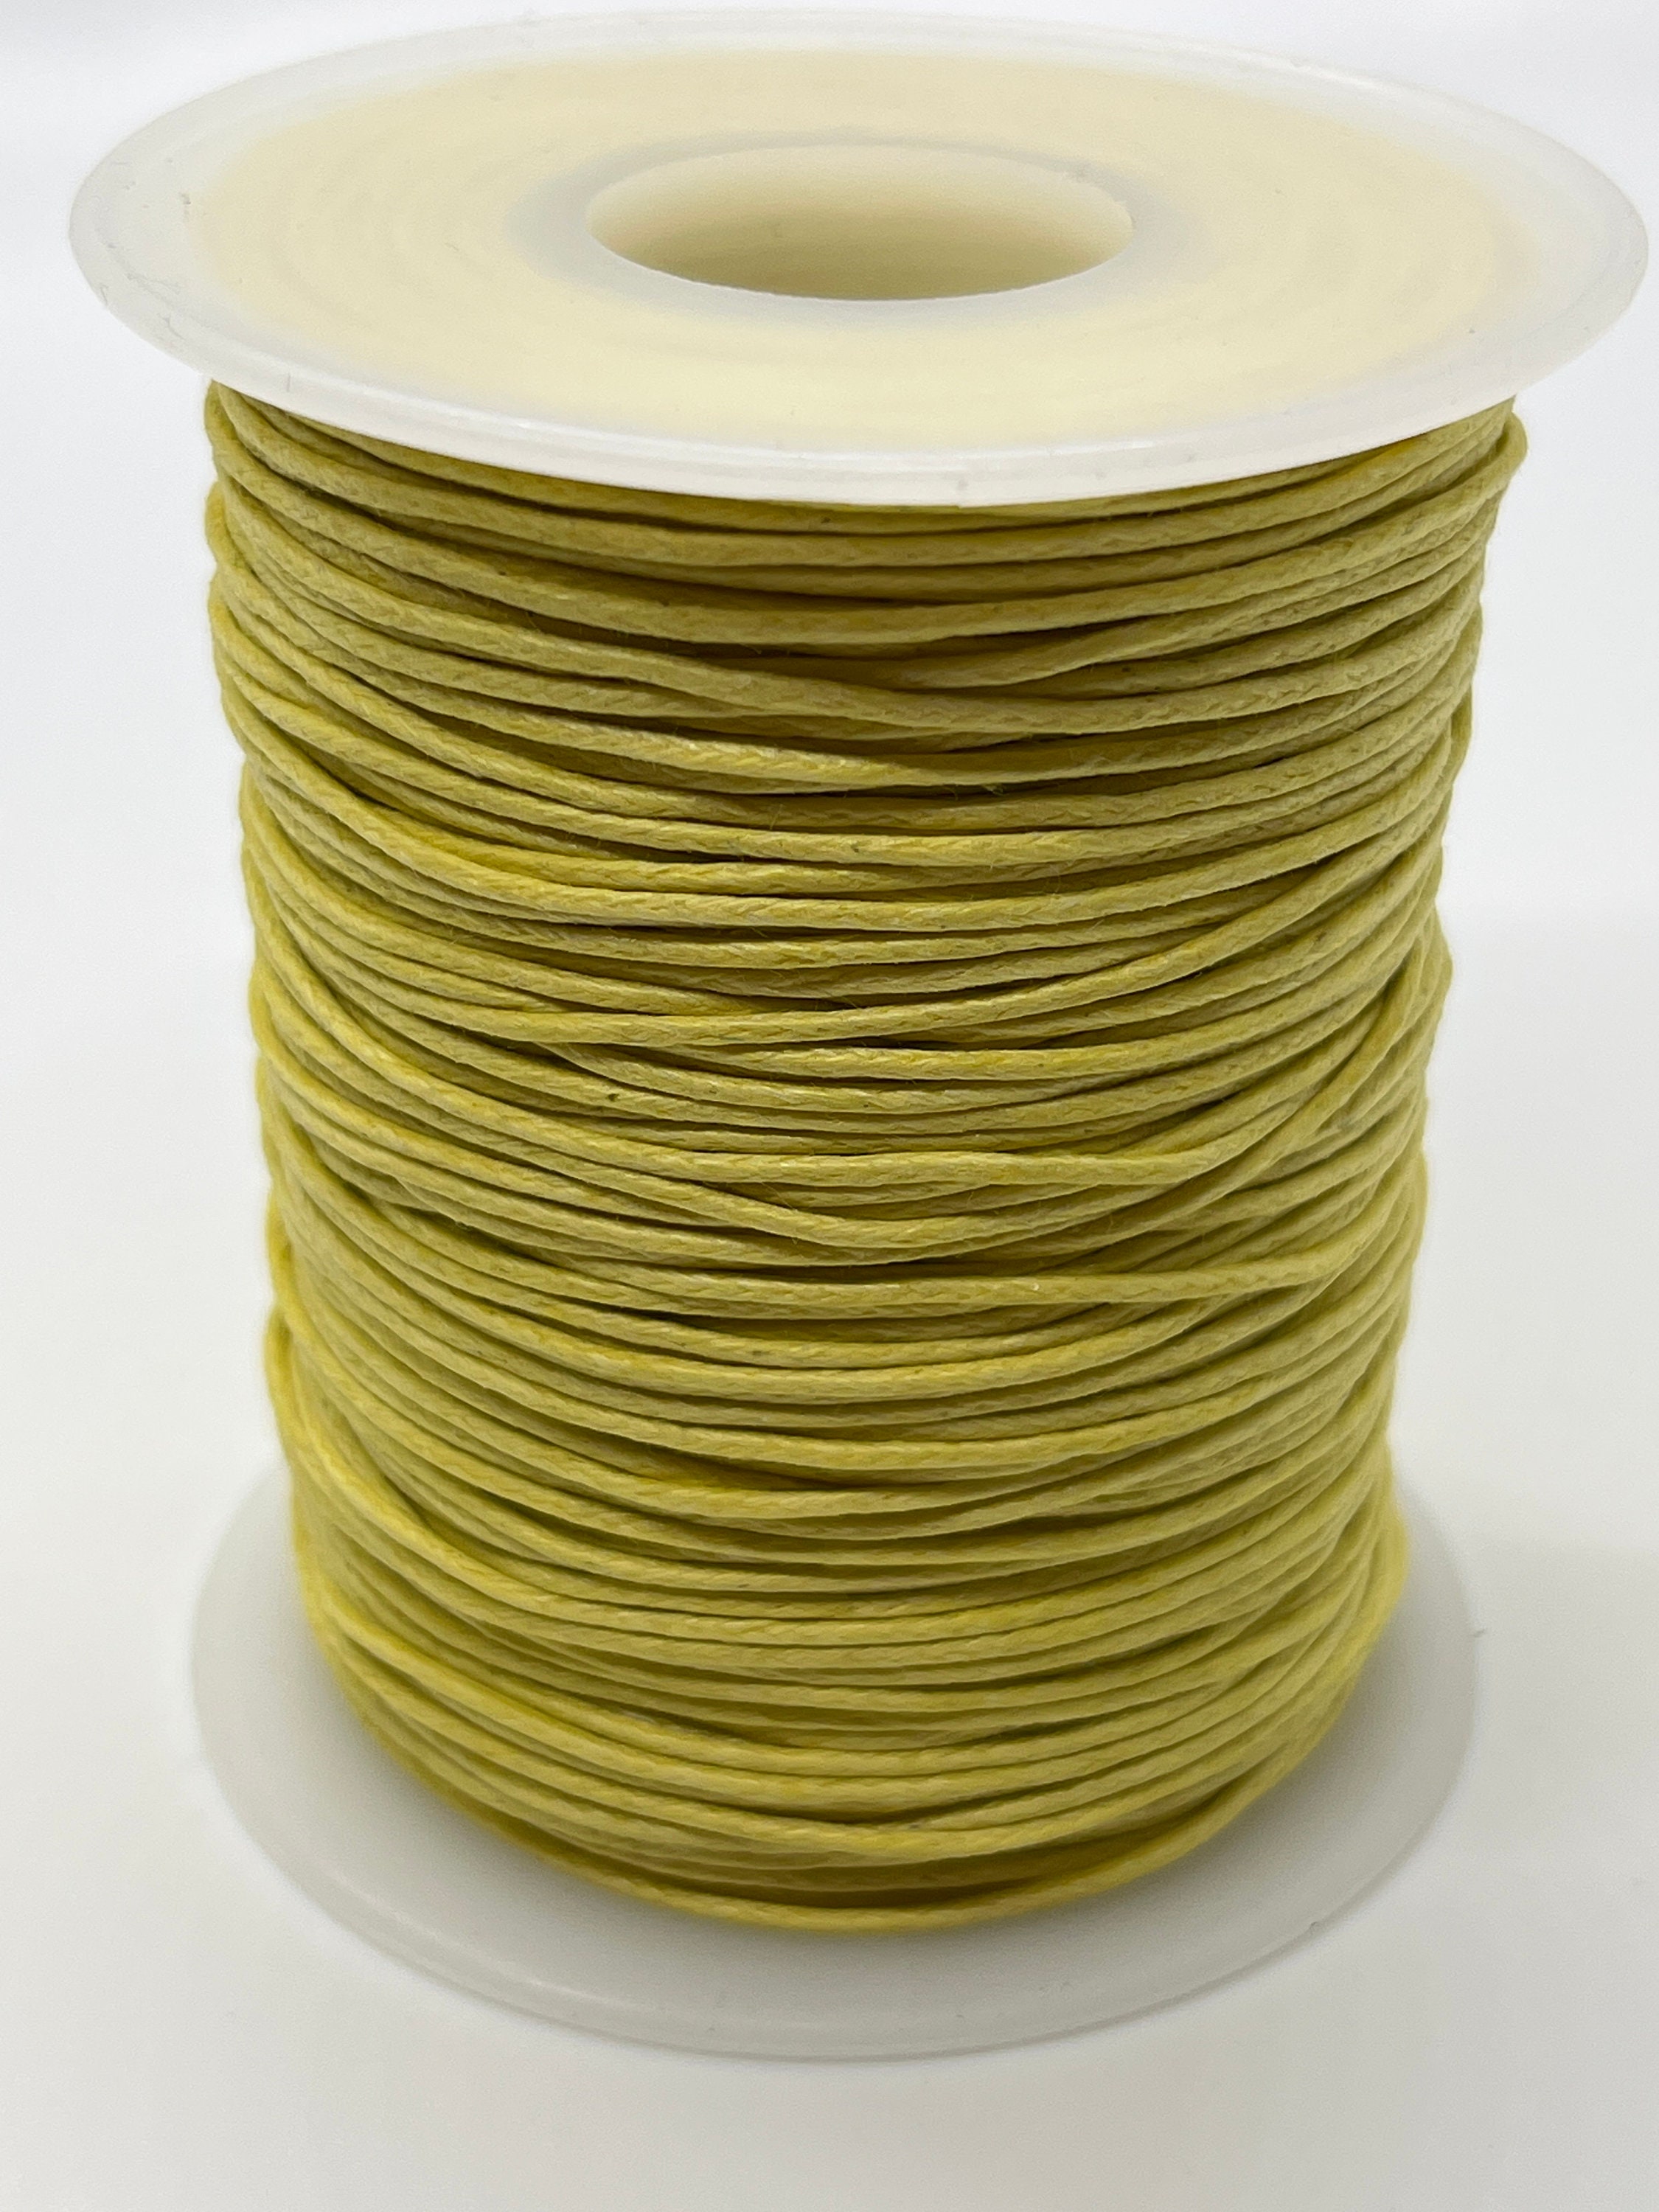 4 Rolls Waxed Cord Waxed Cord for Jewelry Making Waxed String Waxed Cotton Cord, Adult Unisex, Size: 4.53 x 3.54 x 0.79